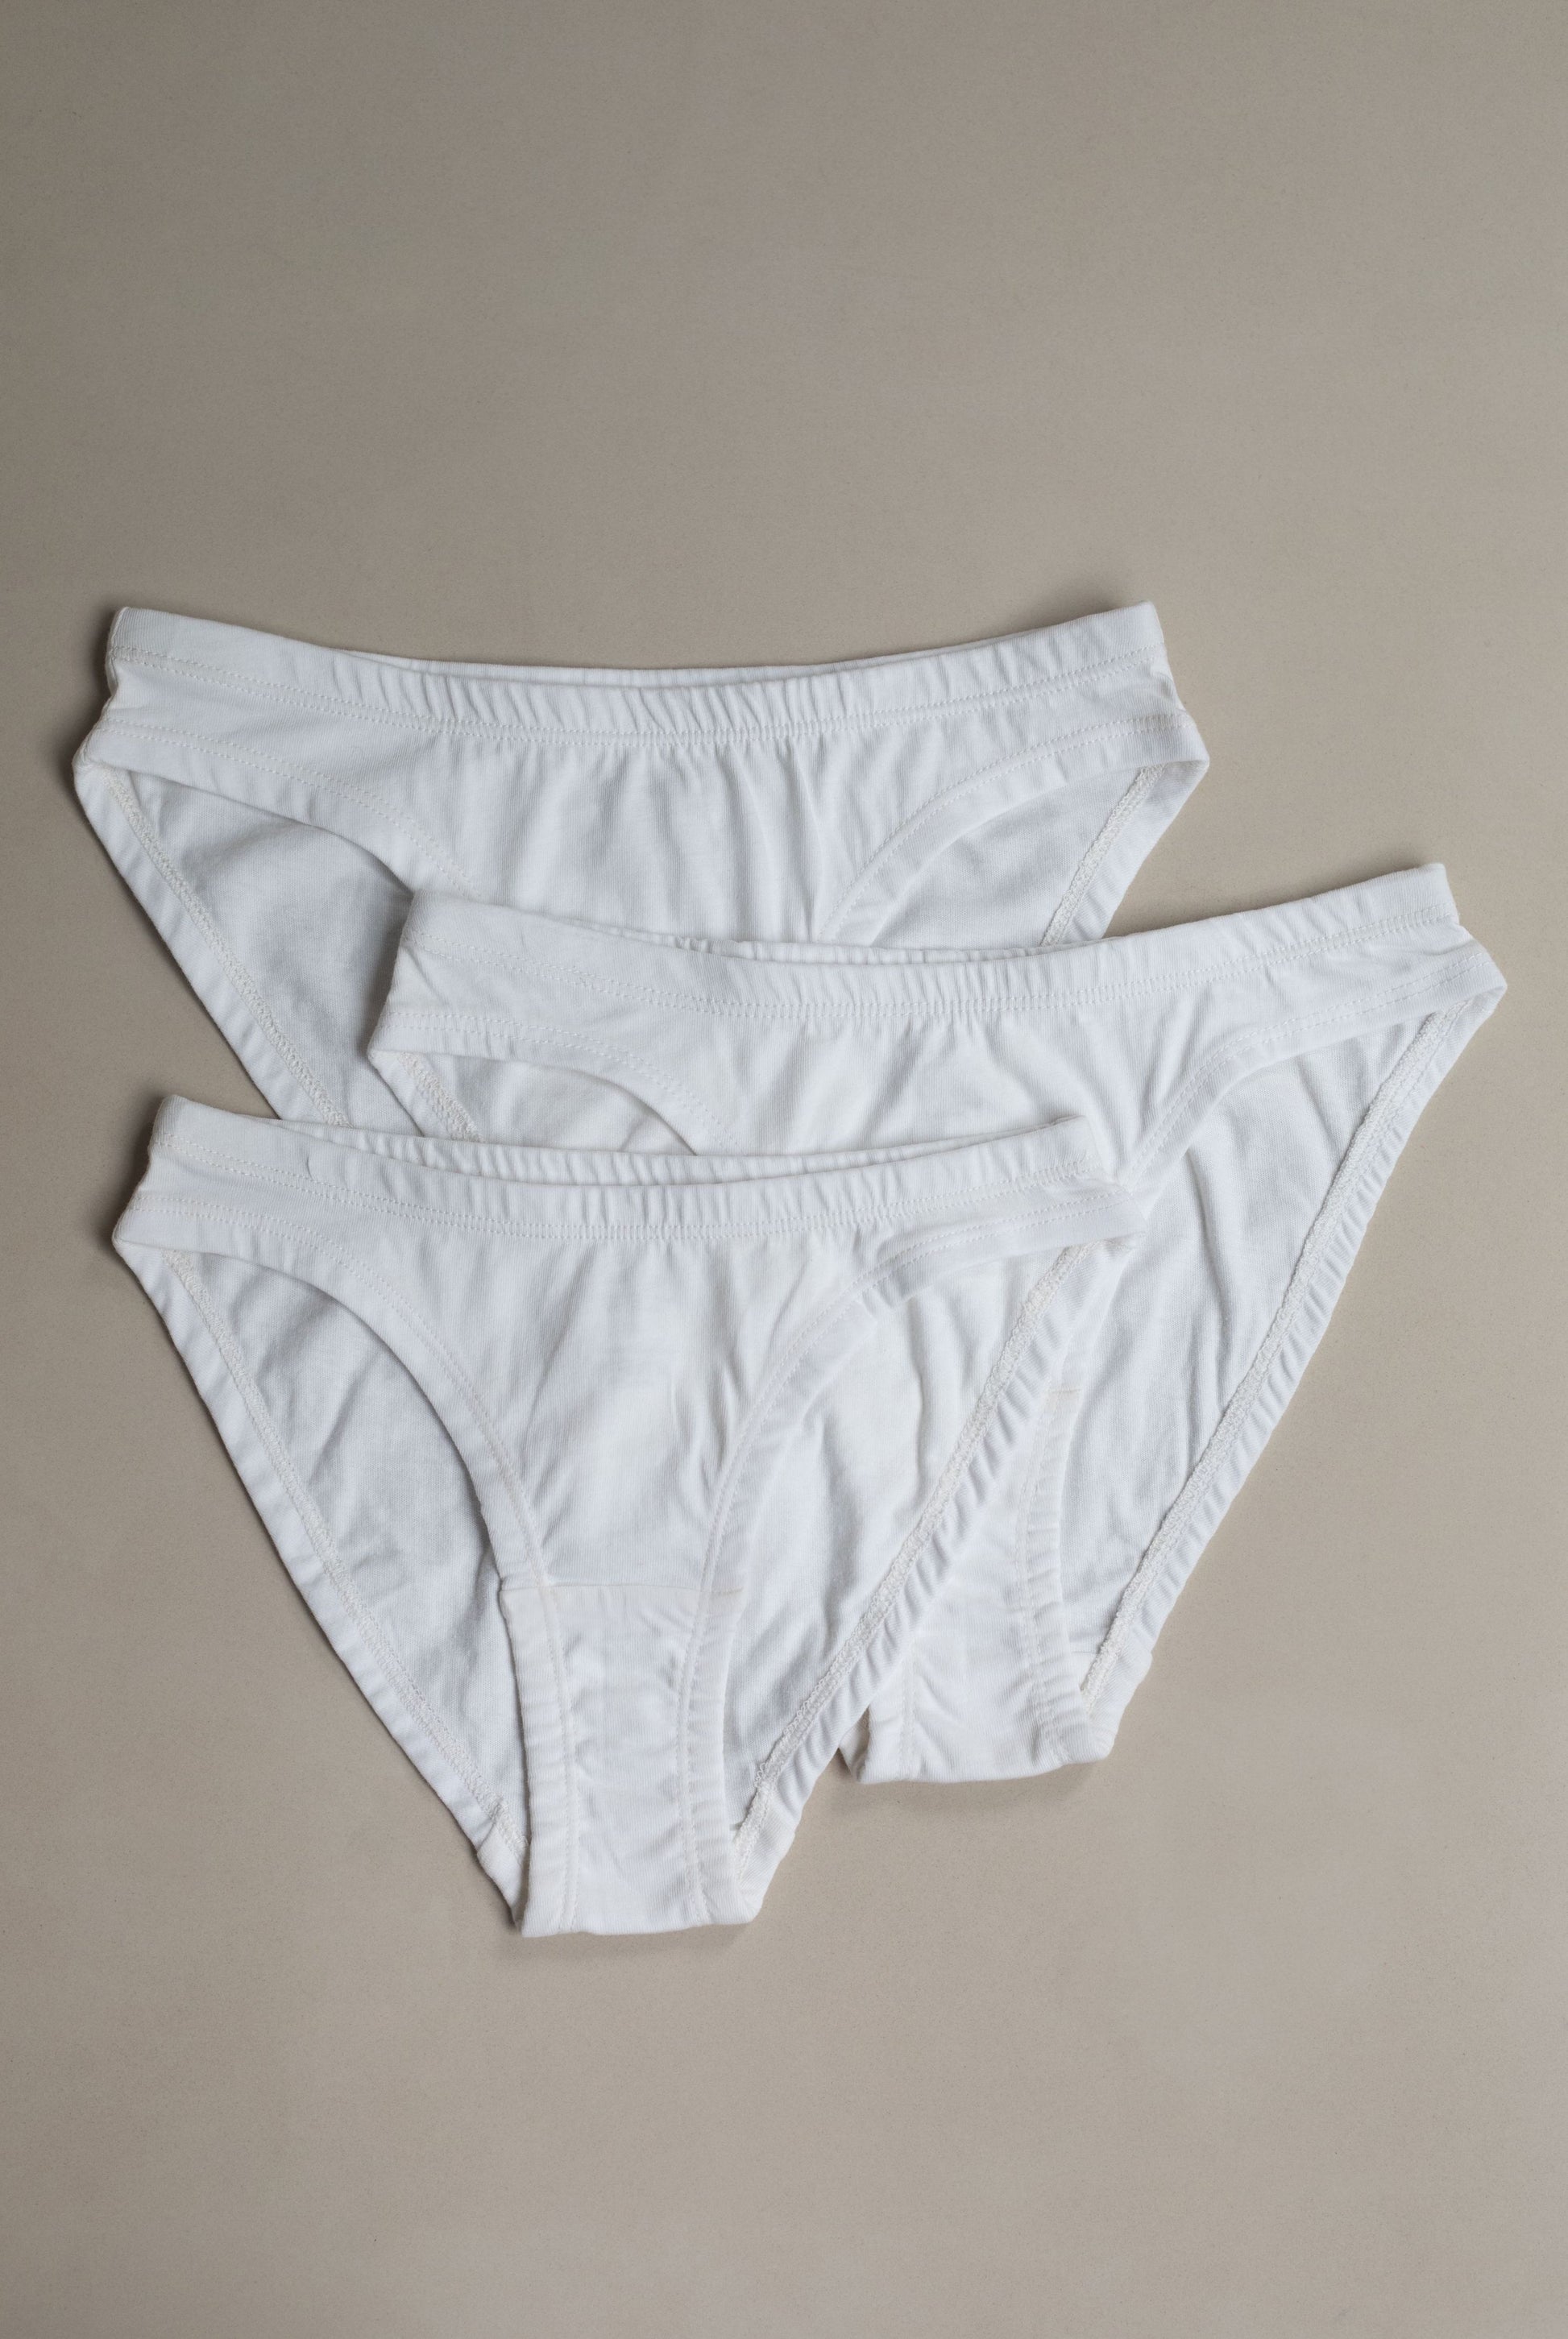 Womens Briefs Organic Cotton Knickers Comfortable Knickers White Bikini  low-rise Pack of 5 